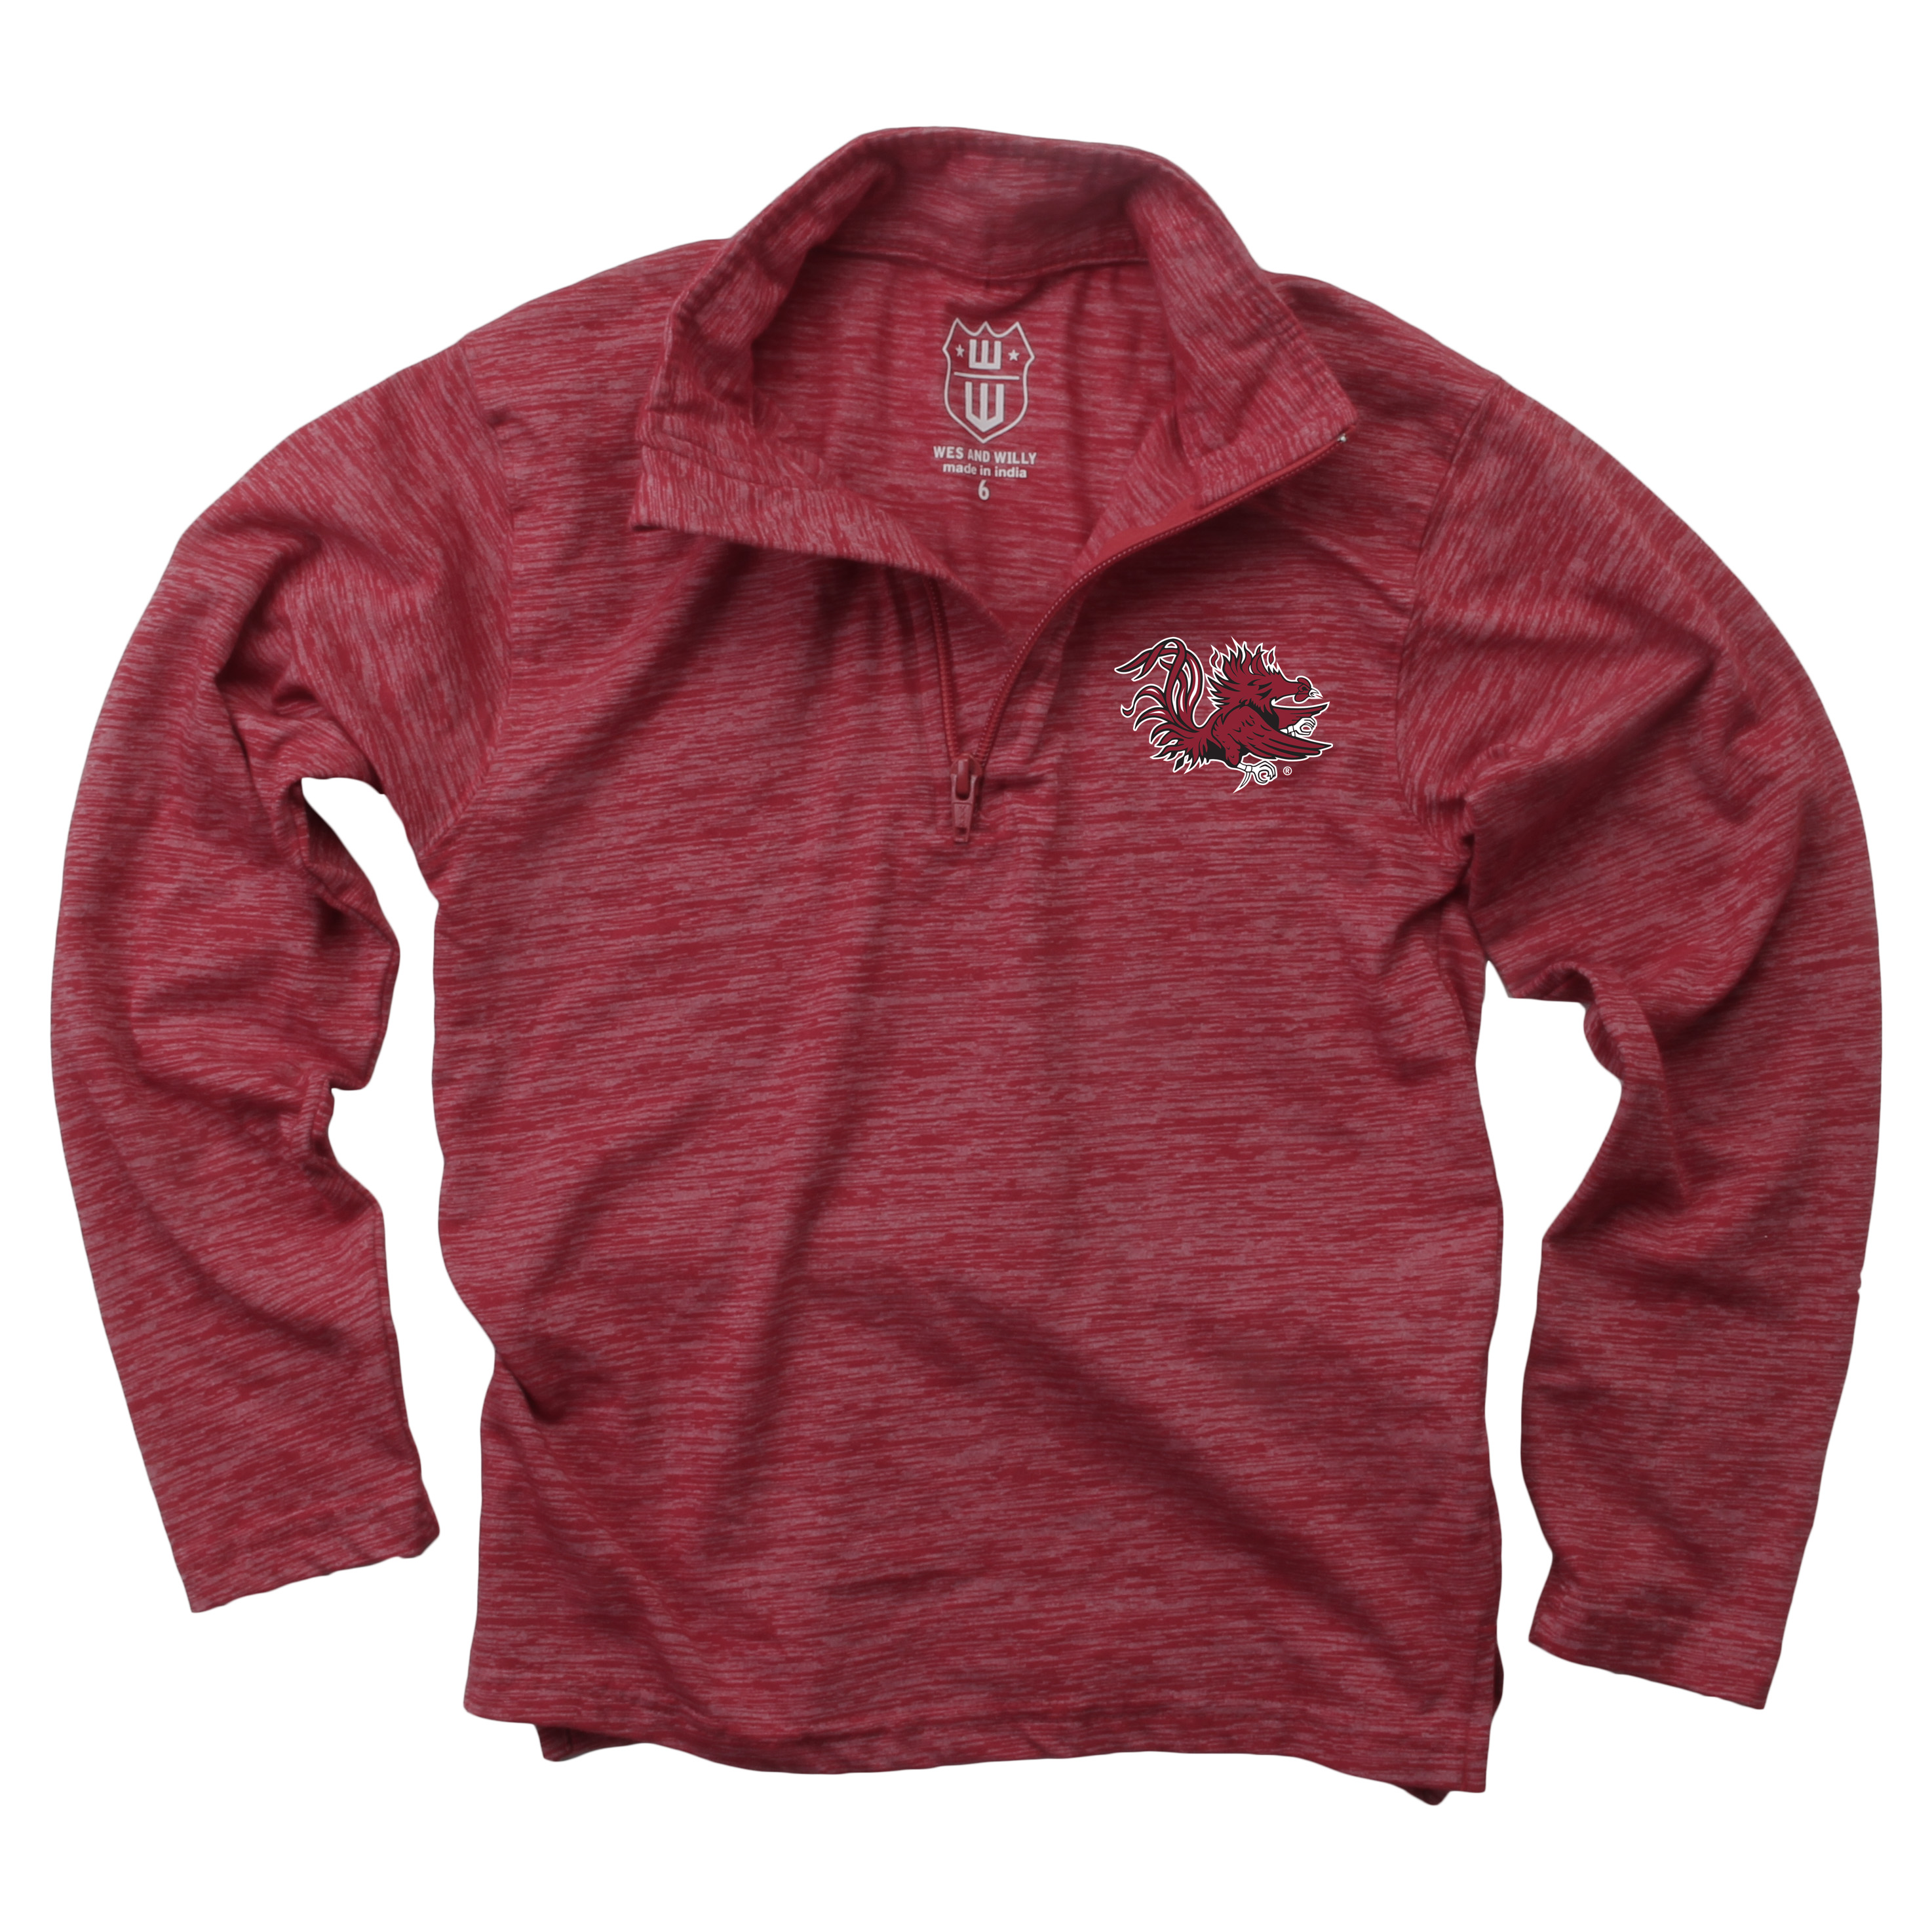 Wes And Willy South Carolina Gamecocks Youth Boys Cloudy Yarn Long Sleeve Quarter Zip